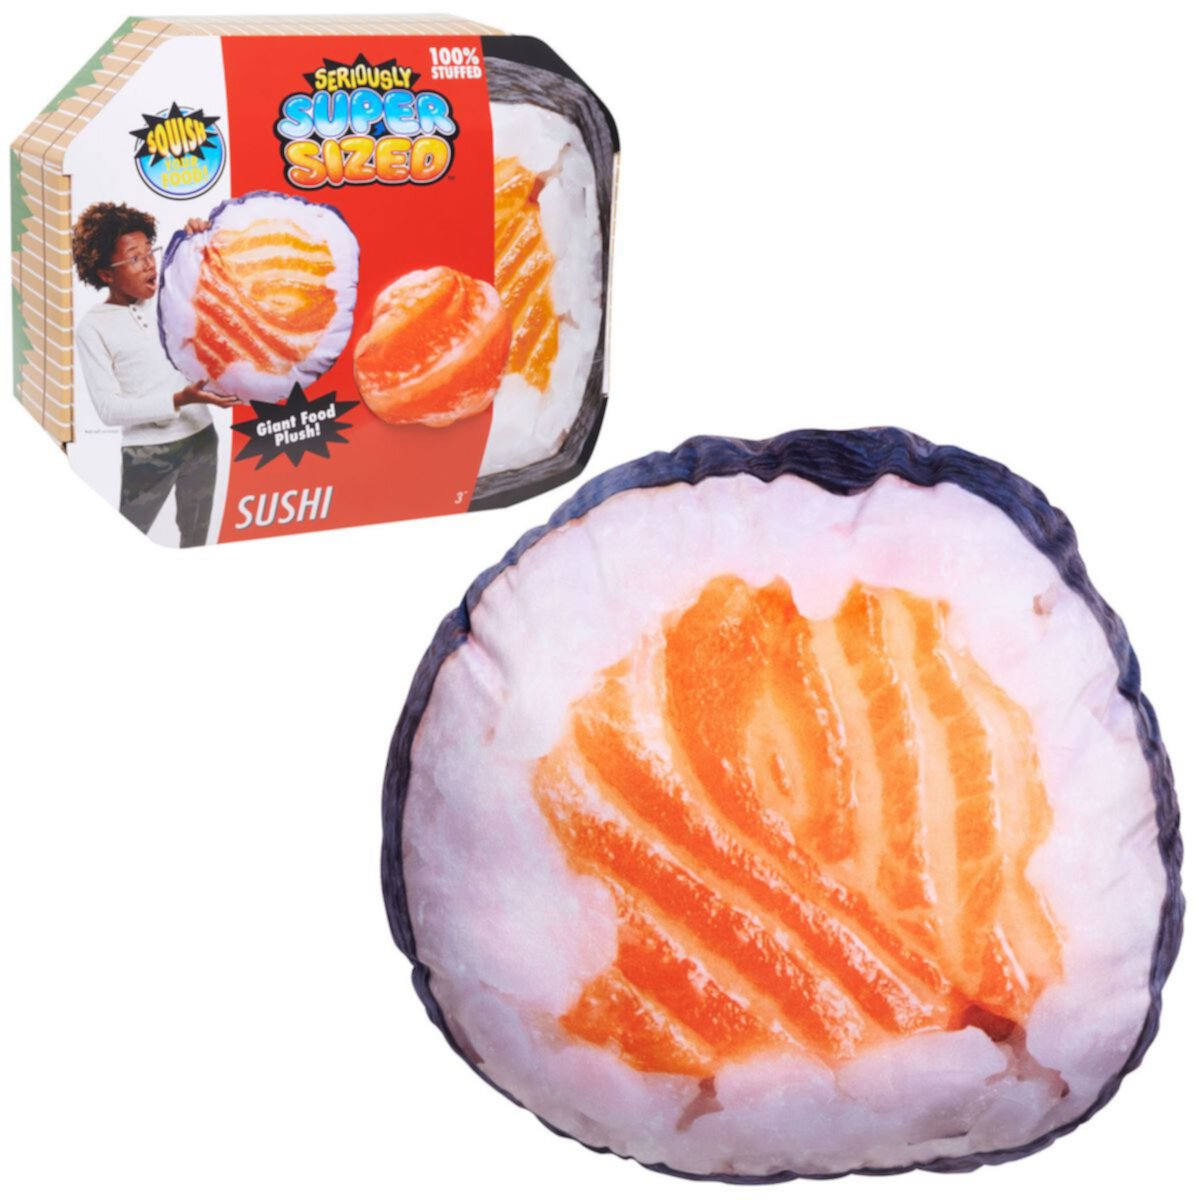 Just Play Seriously Super Size Sushi Food Plush Just Play